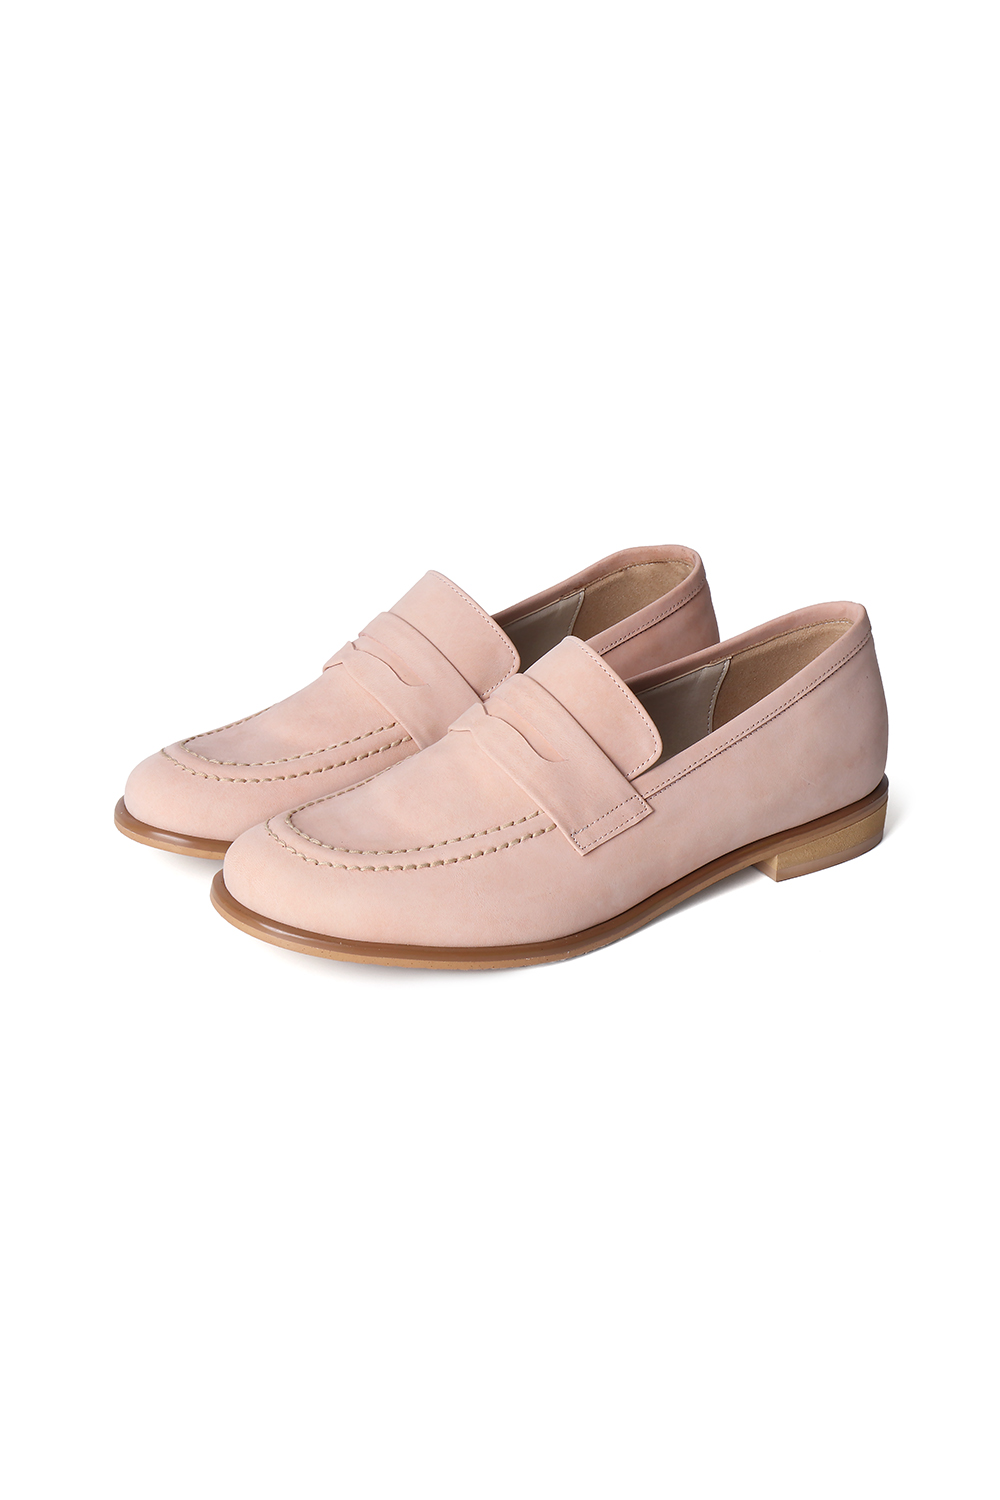 PALE PENNY LOAFER [PINK]